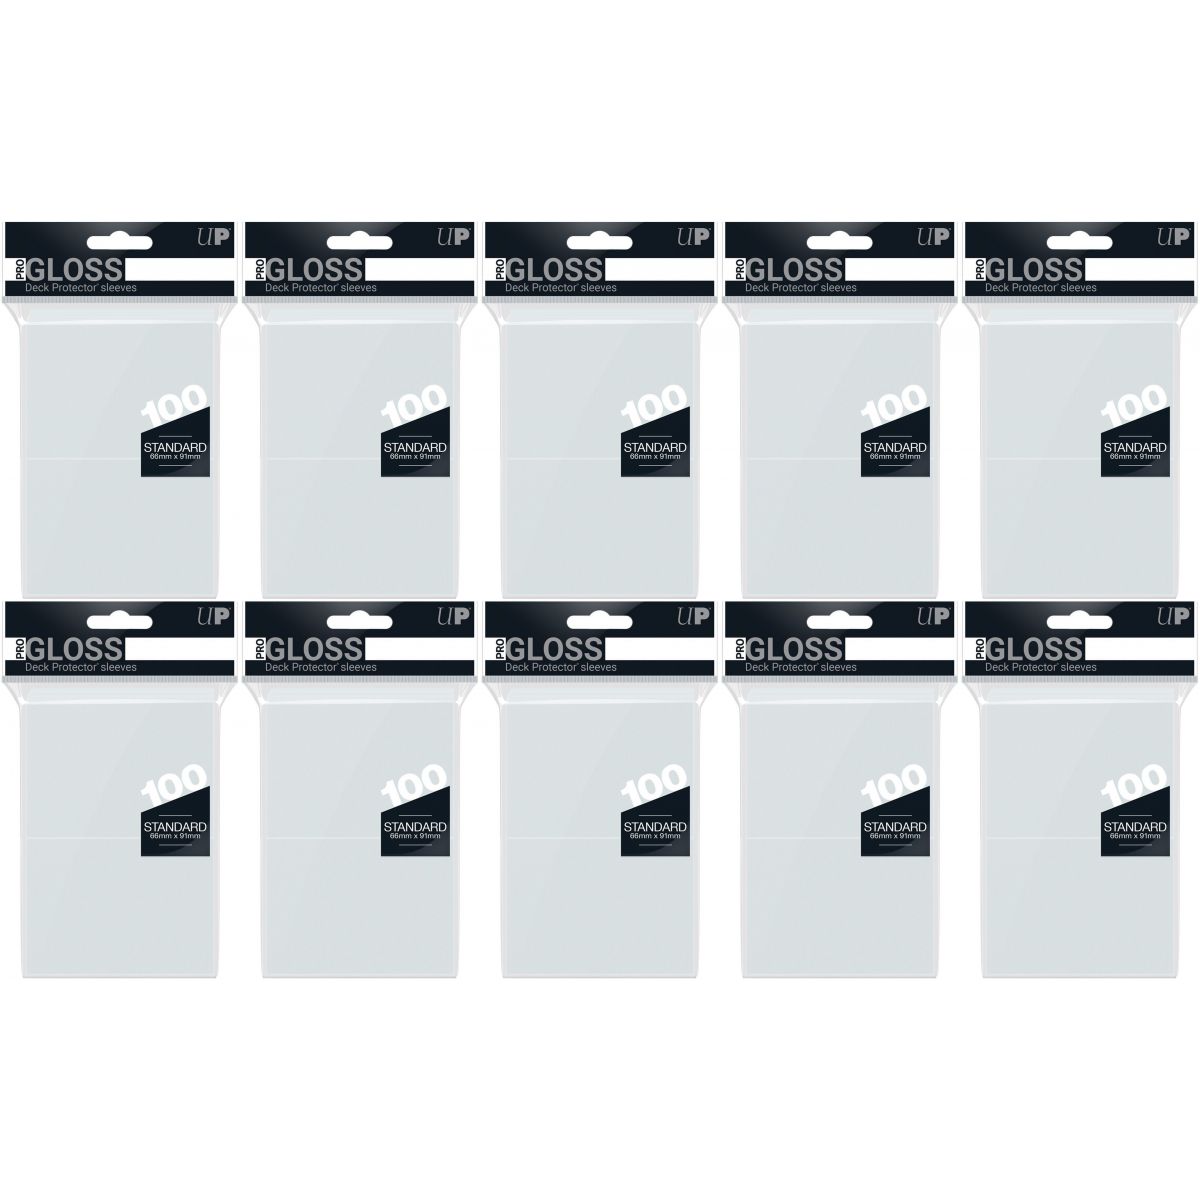 Ultra Pro - Card Sleeves - Standard - Clear - Transparent (1000)